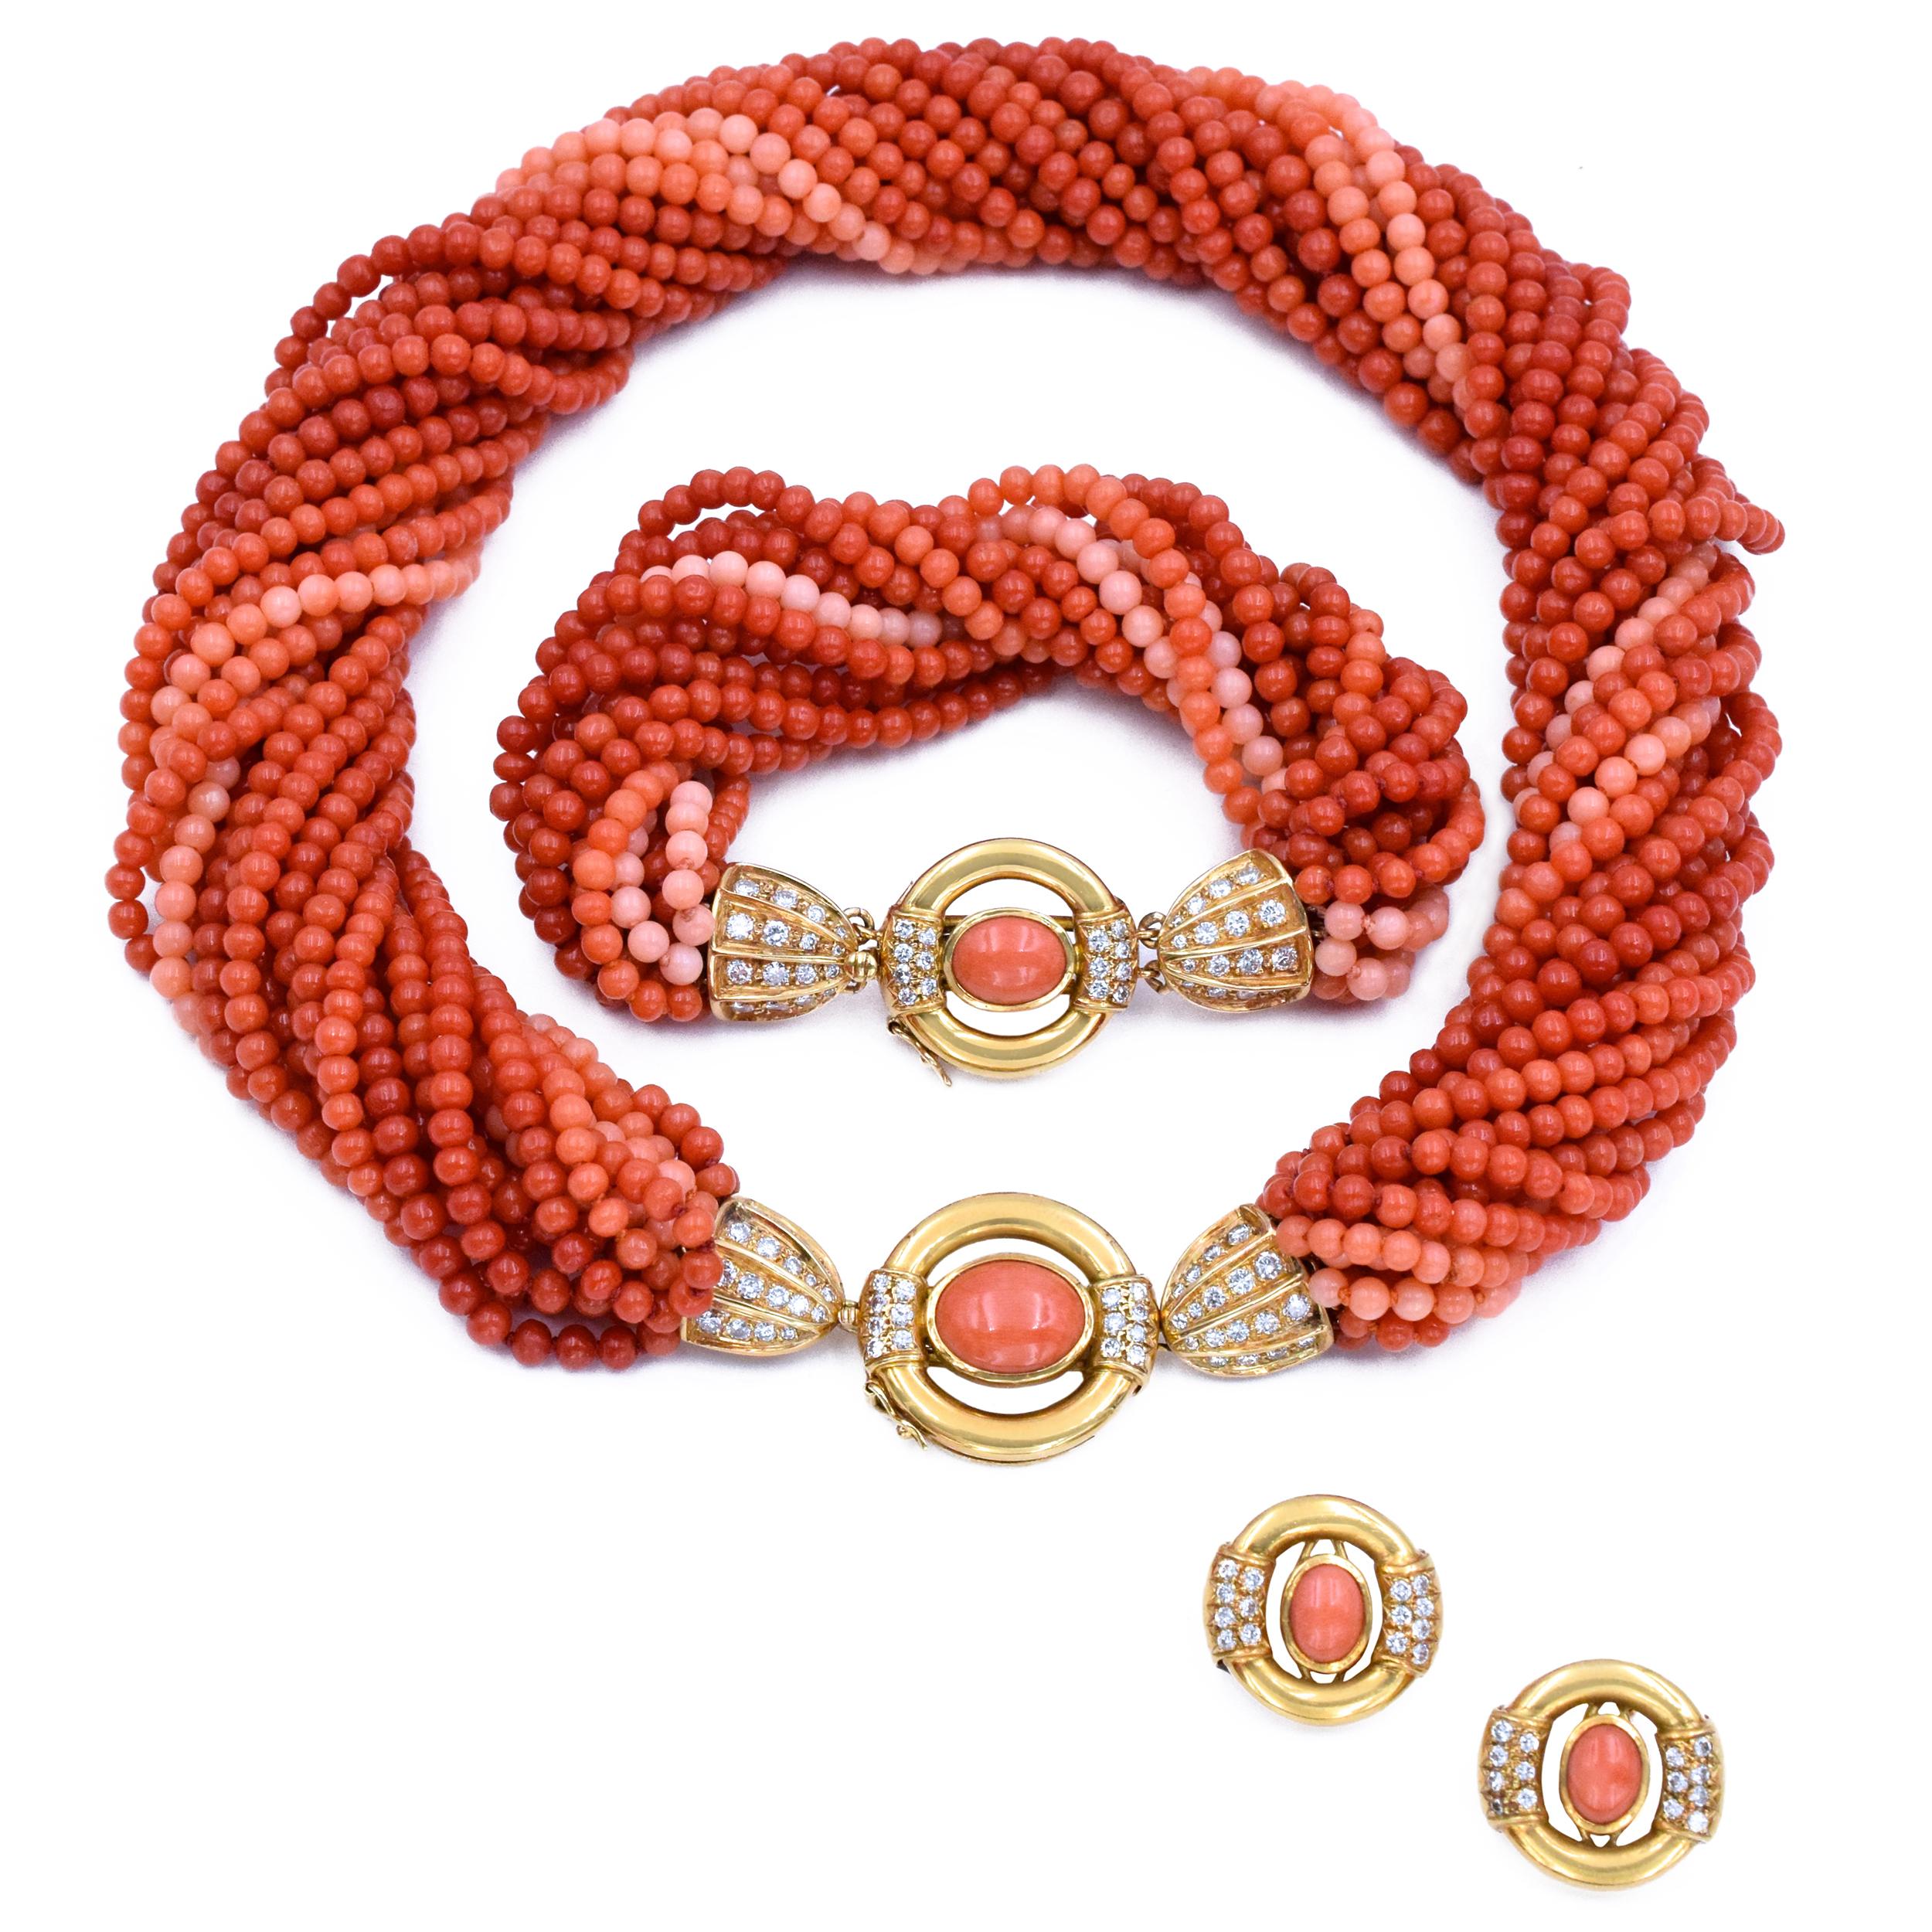 GUCCI A coral and diamond necklace, bracelet, and earrings suite,  comprising a coral bead necklace and bracelet of torsade design, the clasp and earrings centrally set with an oval-shaped cabochon coral, accented by round brilliant-cut diamonds,